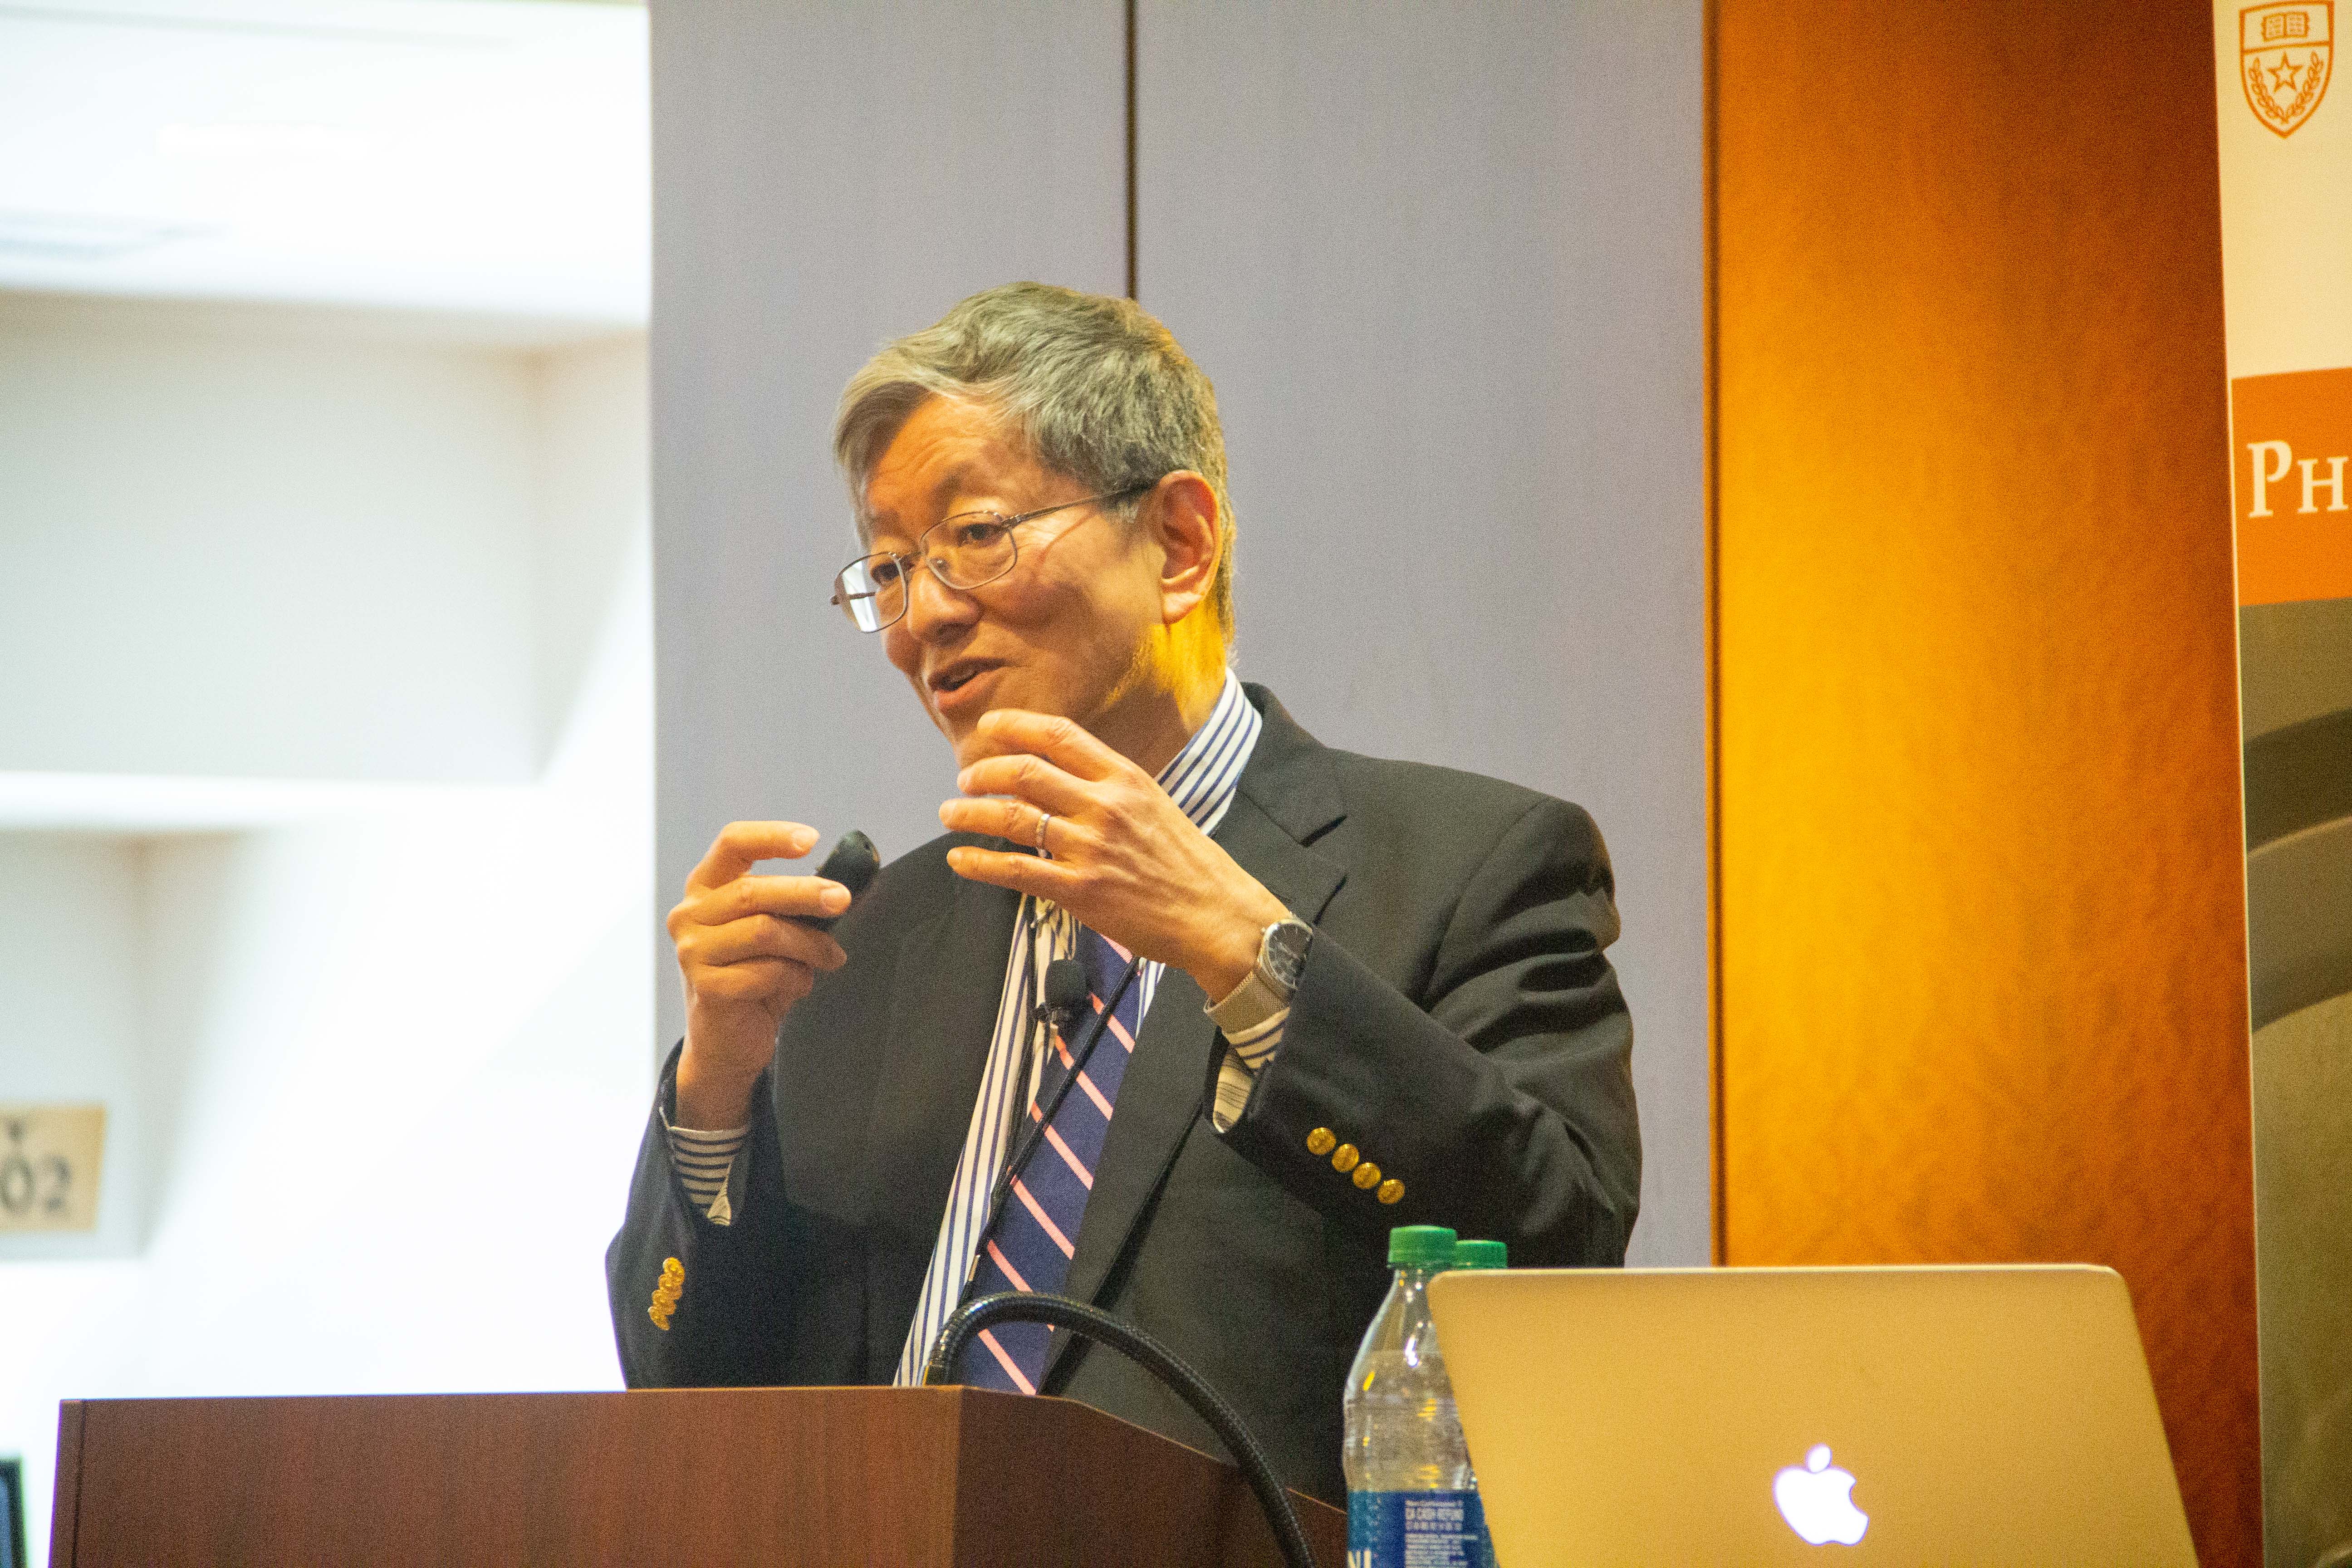 Professor Liu standing behind a podium with his laptop presenting.